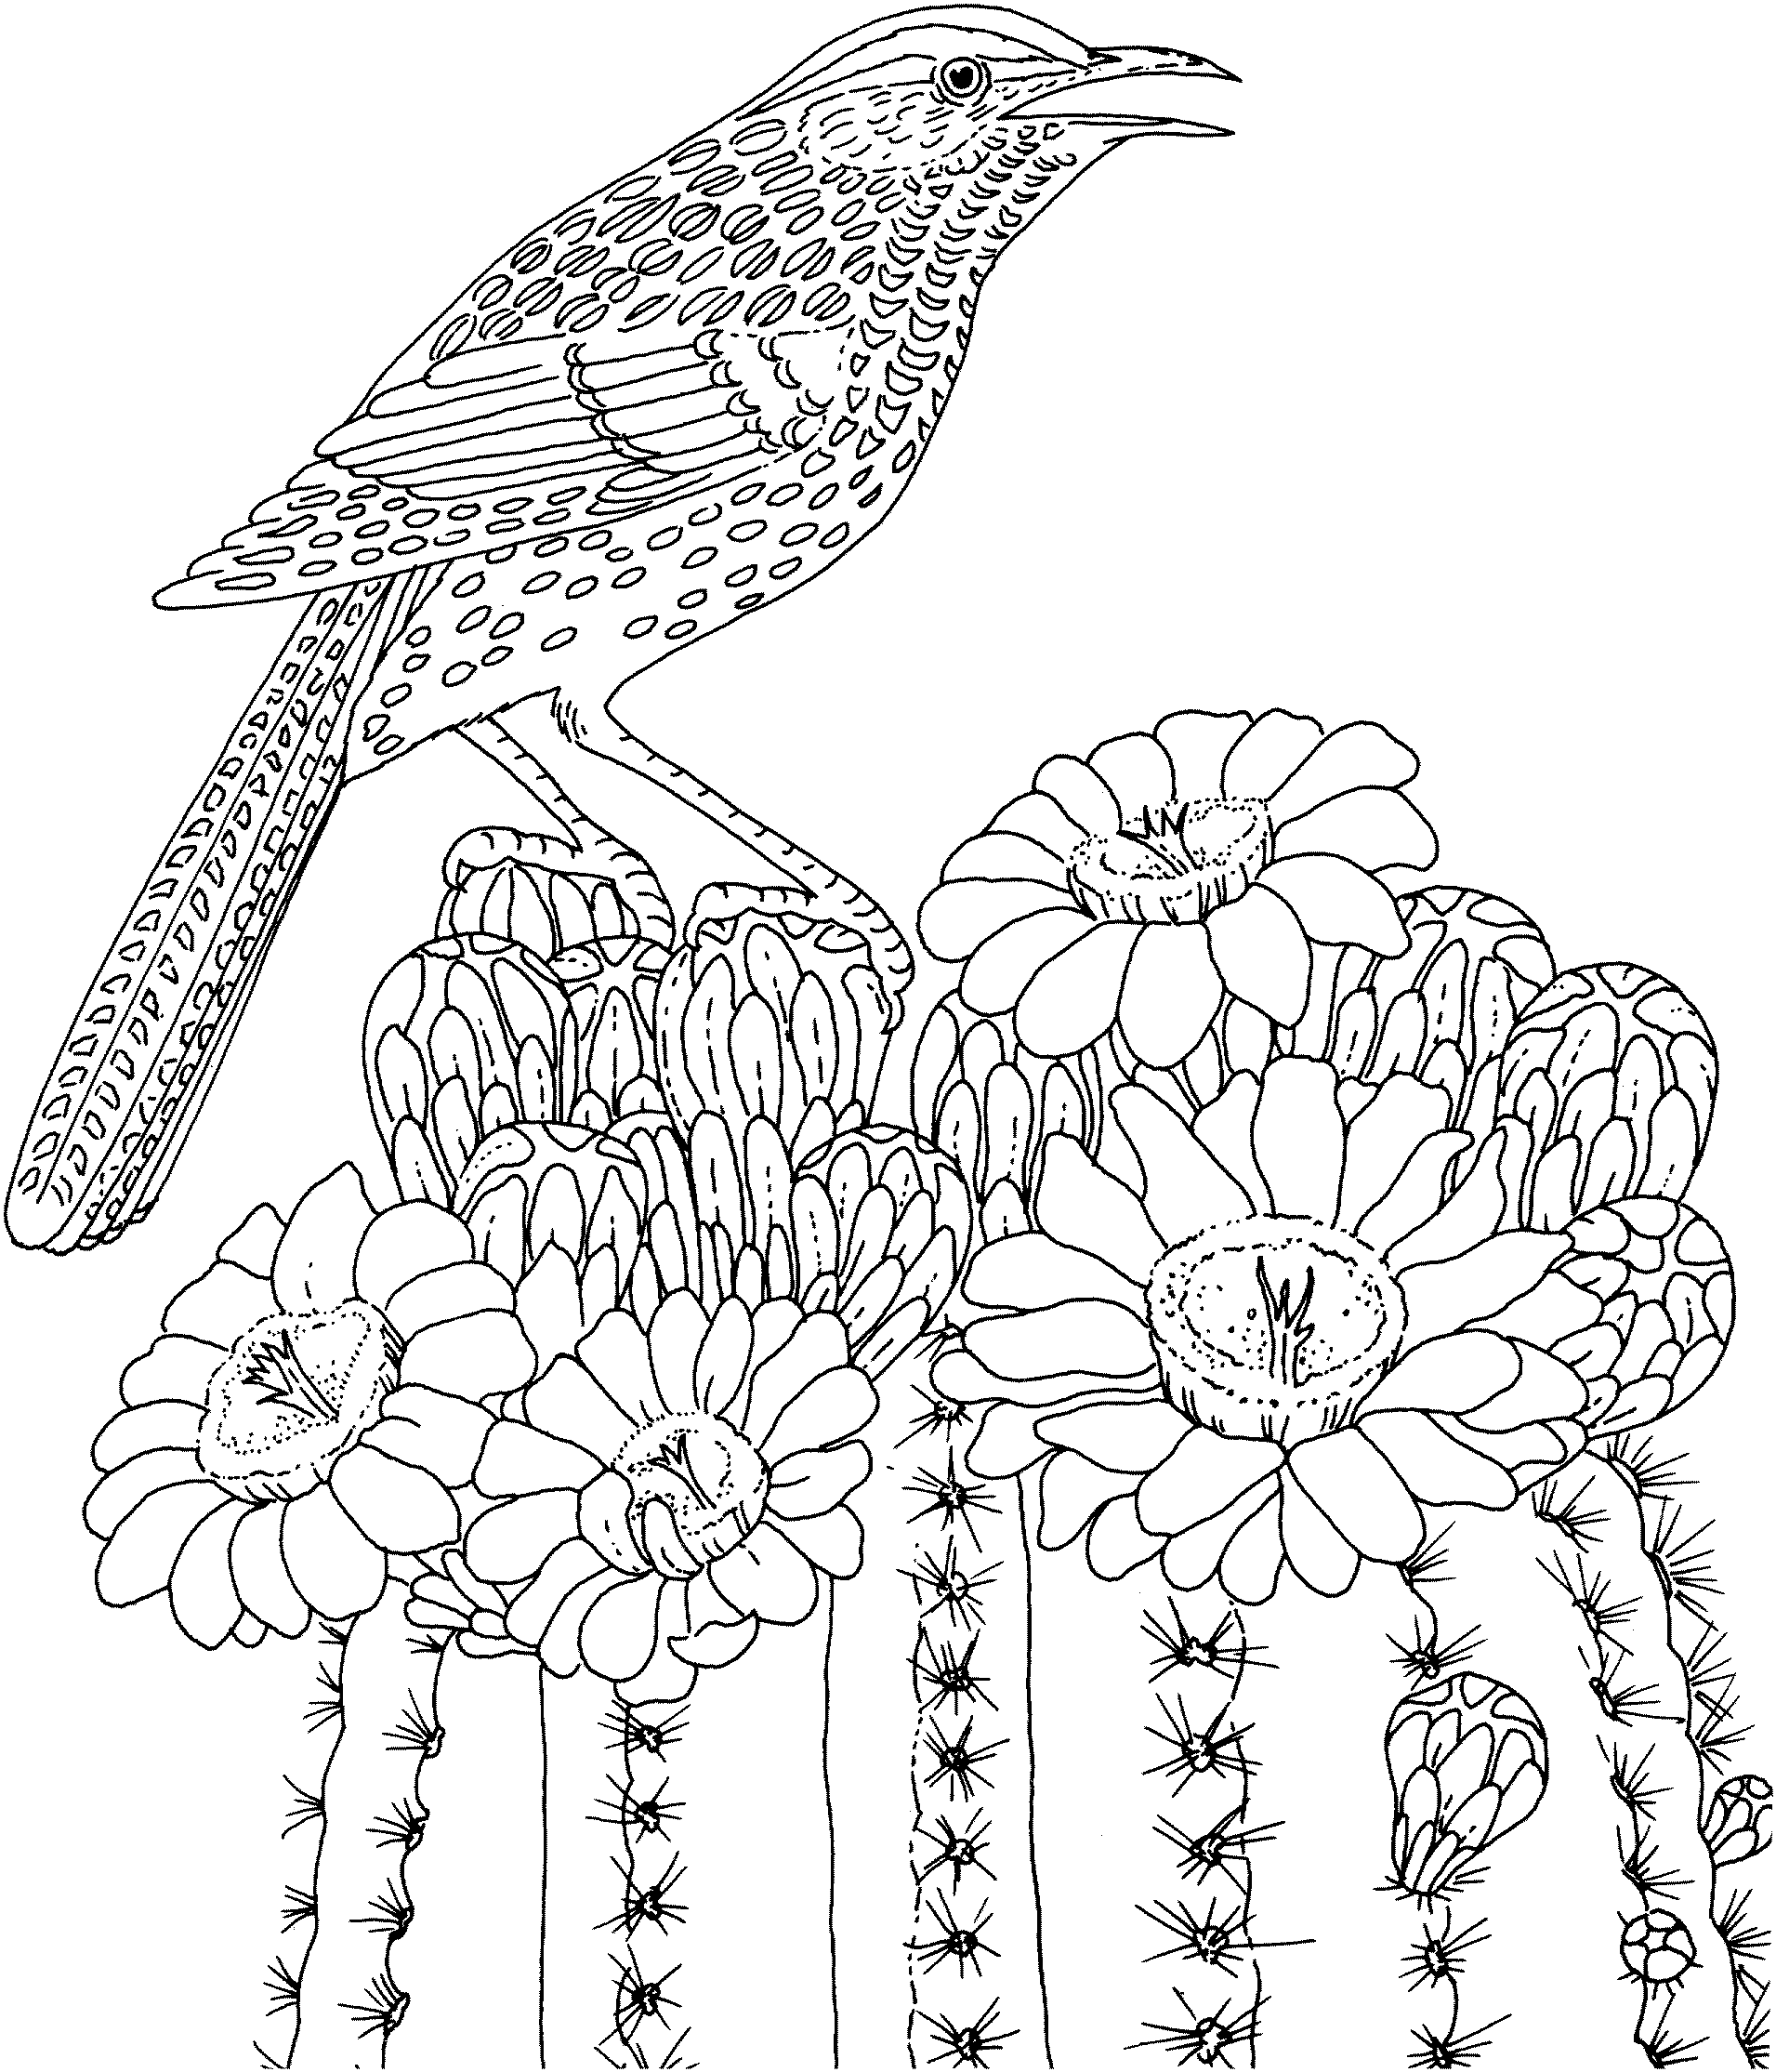 Challenging Printable Coloring Pages - Coloring Home